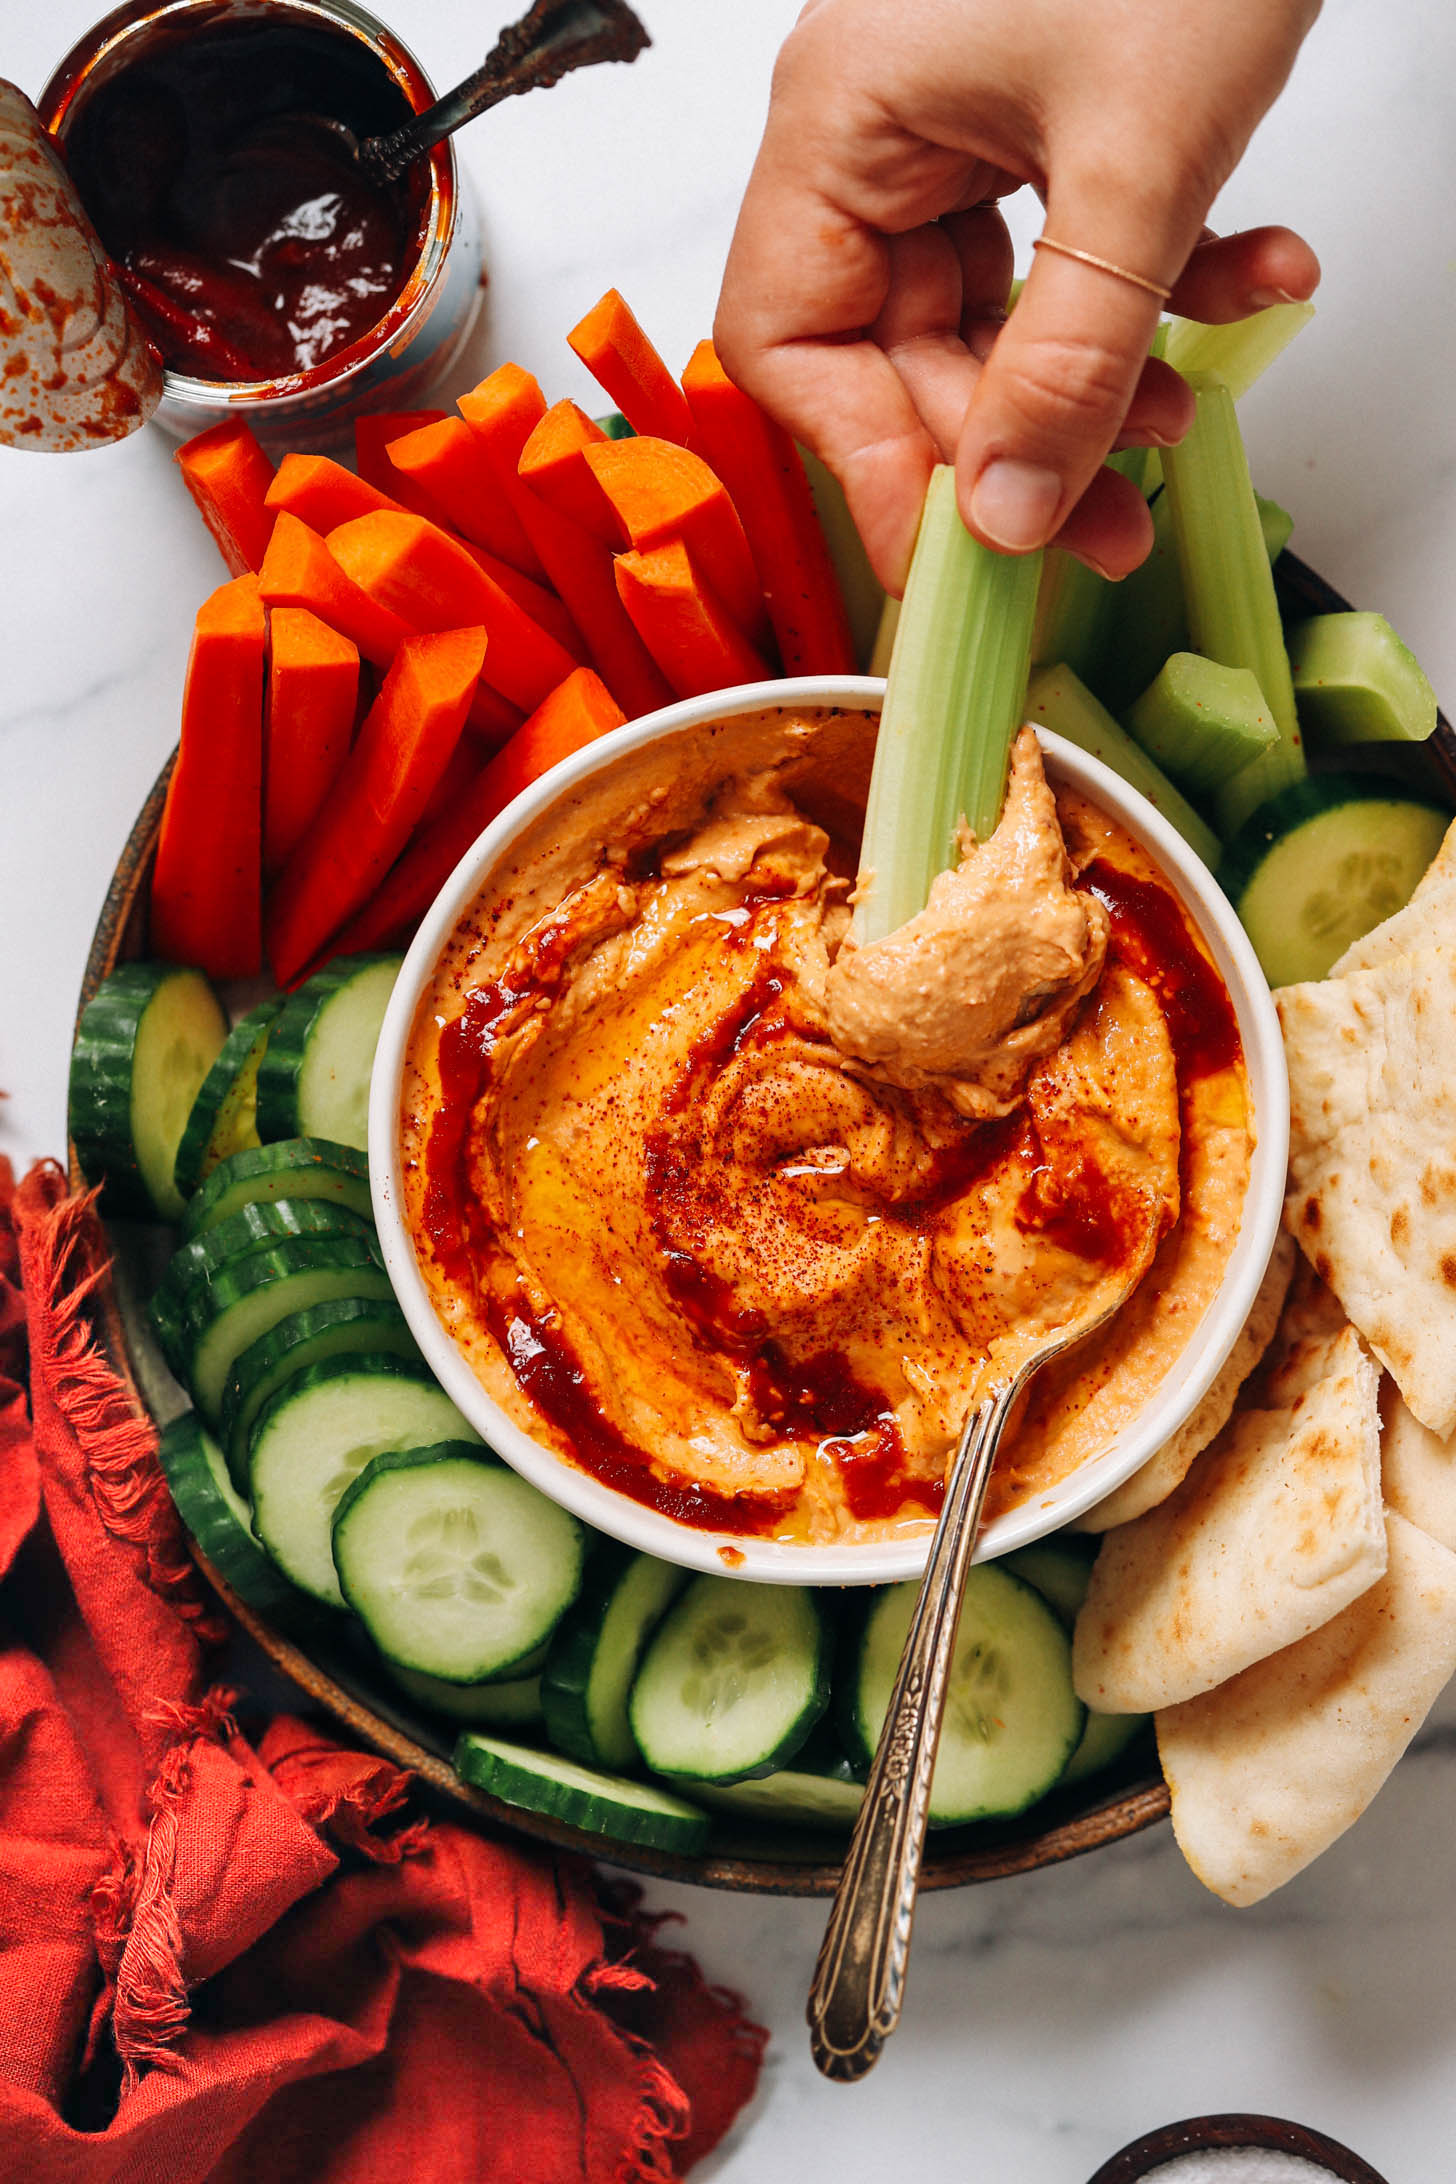 Creamy chipotle hummus 7 ingredients 10 minutes perfectly spicy and smoky minimalistbaker recipe plantbased chipotle hummus 9